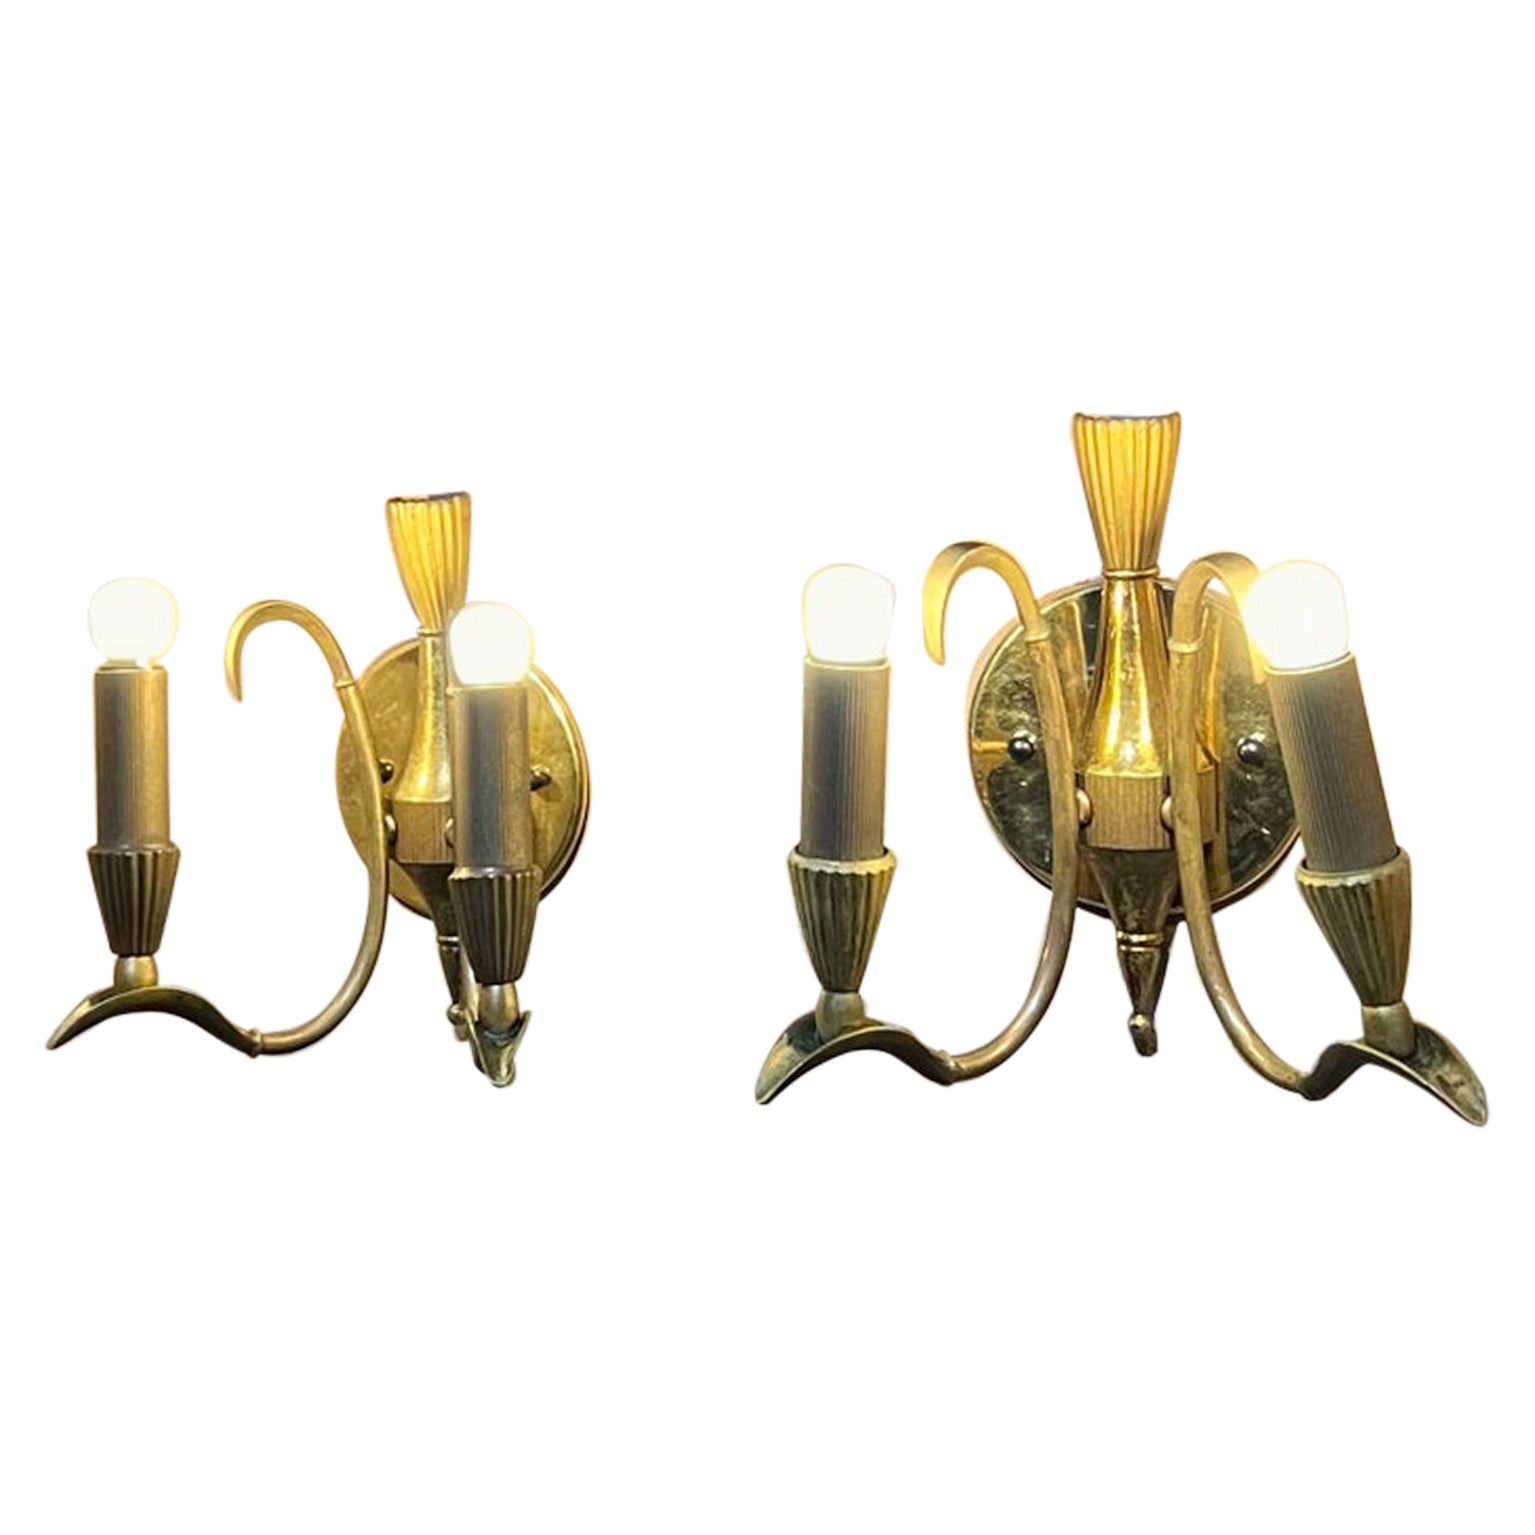 1950s Neoclassical Italian Wall Sconce Pair Sculptural Double Arm from Italy